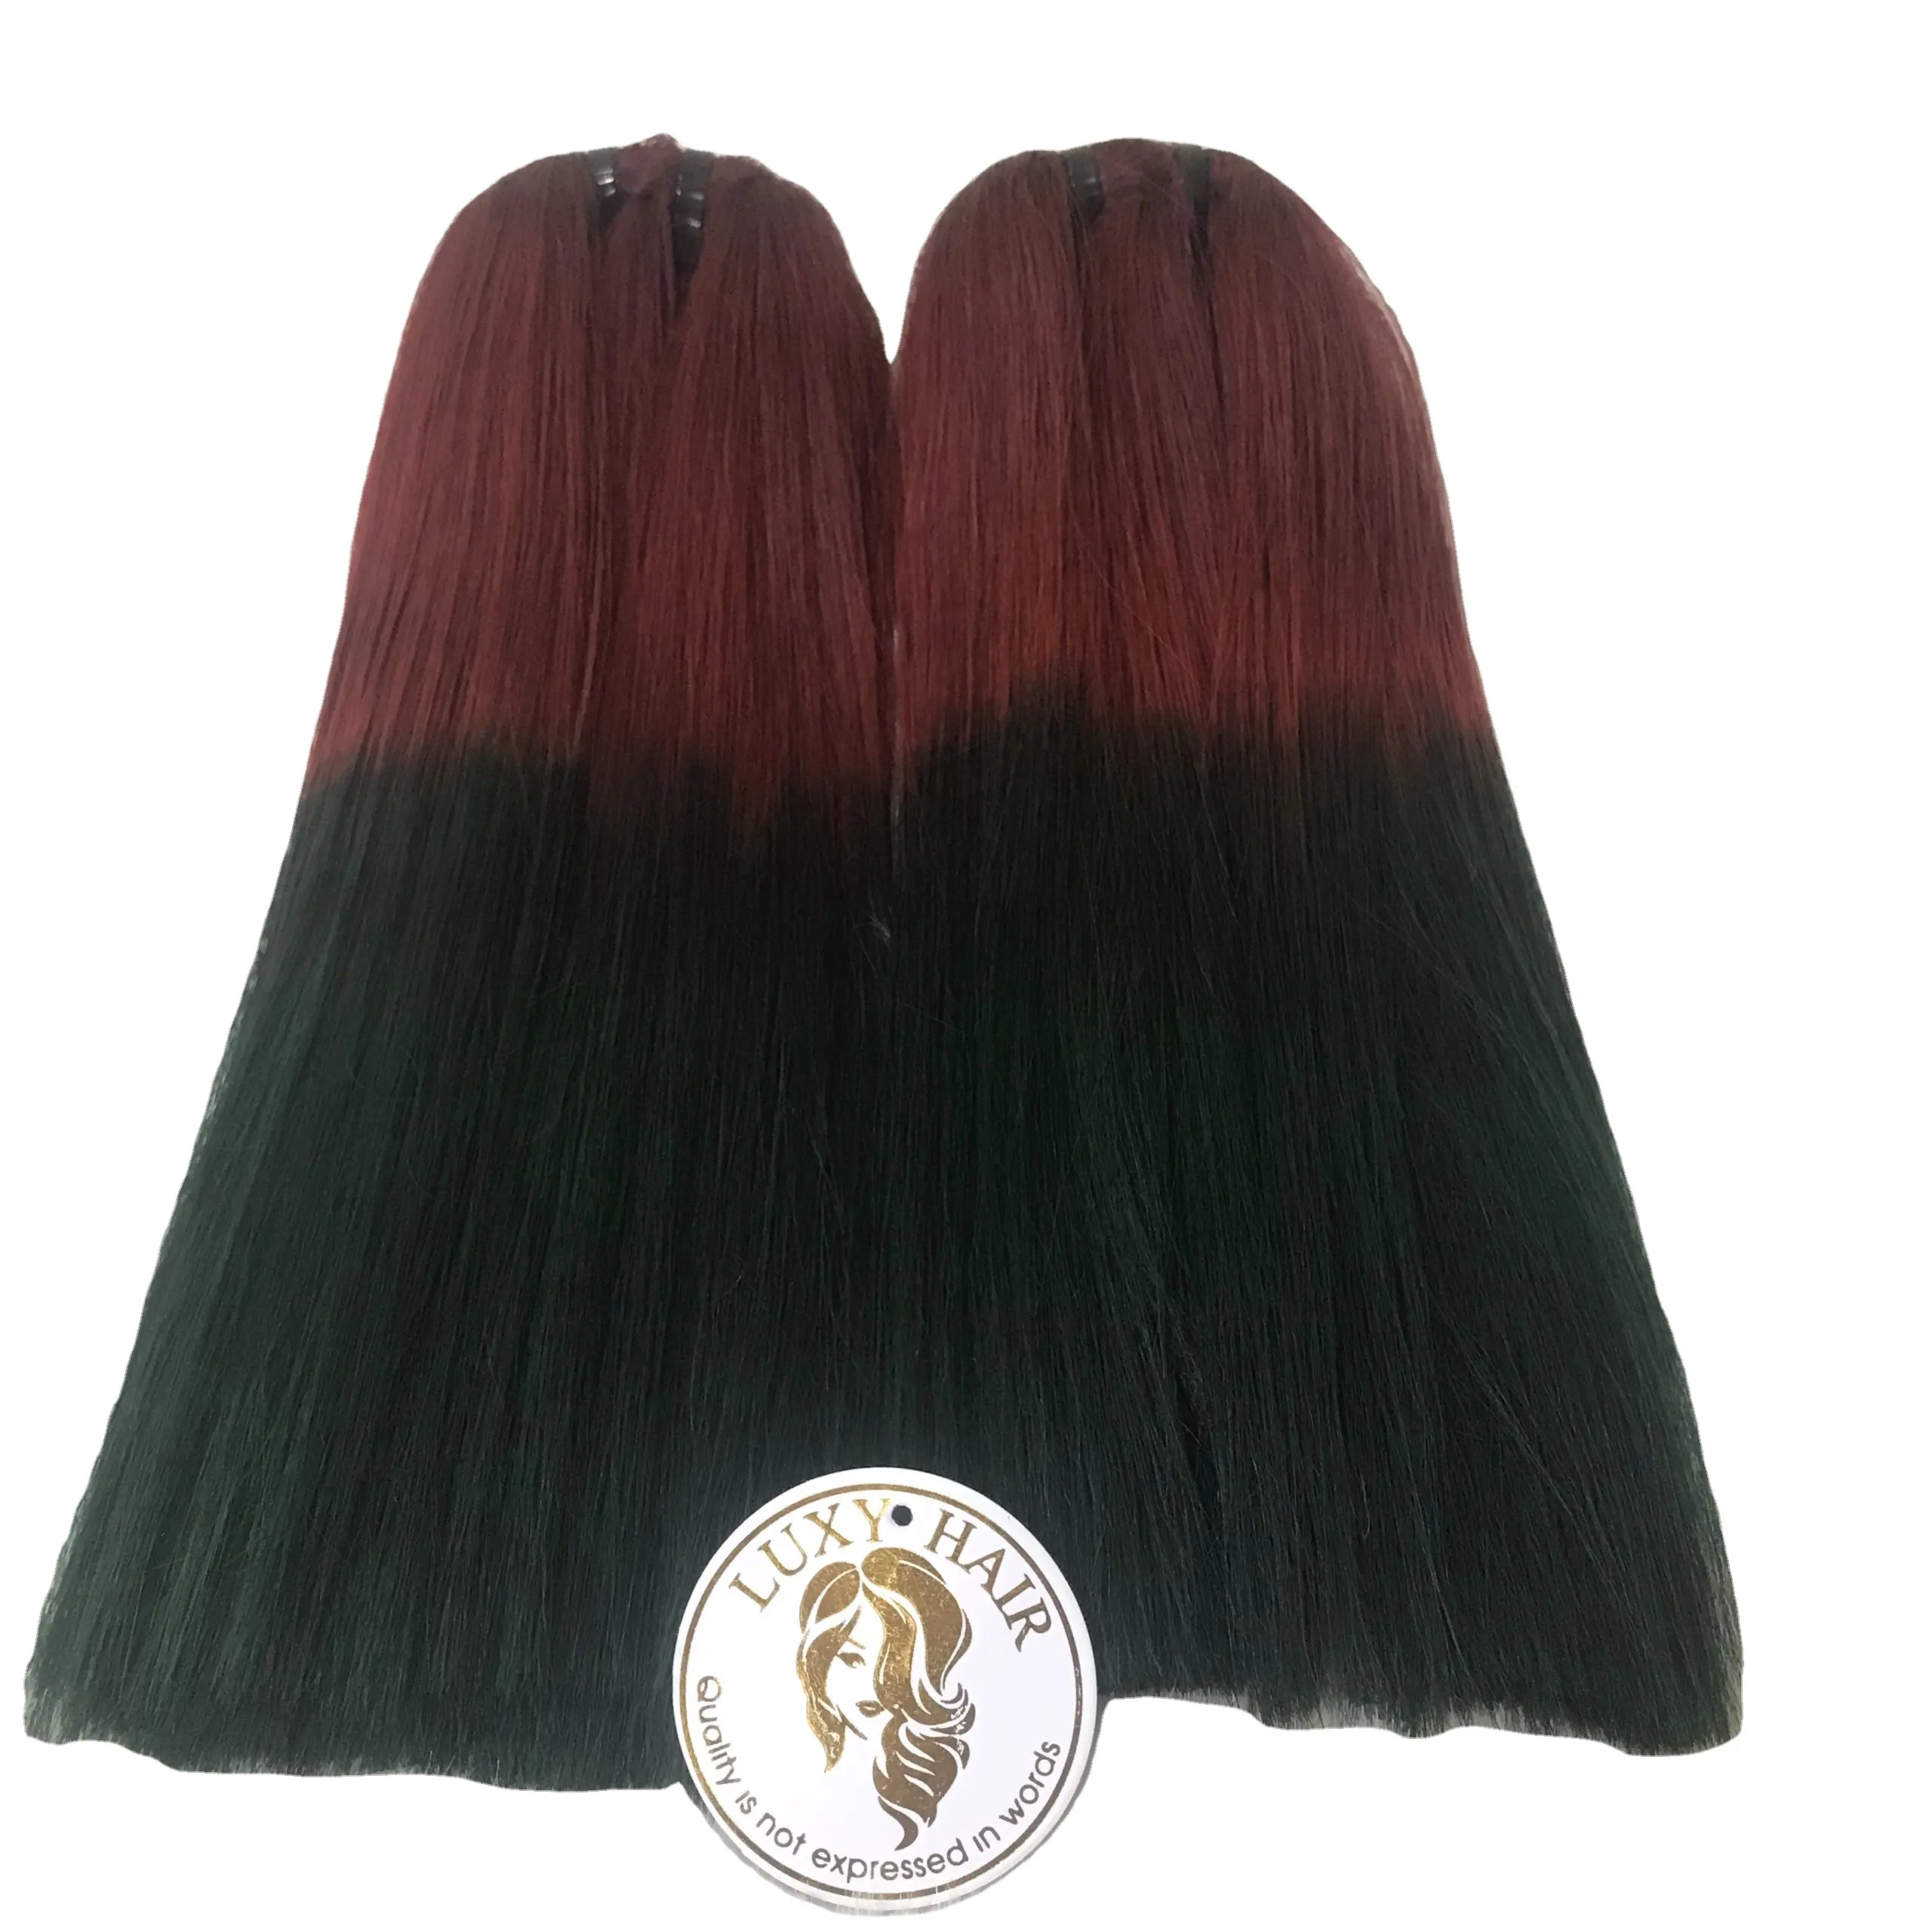 Best quality Vietnamese hair supplier with bone straight, wave and curly styles and rich colors